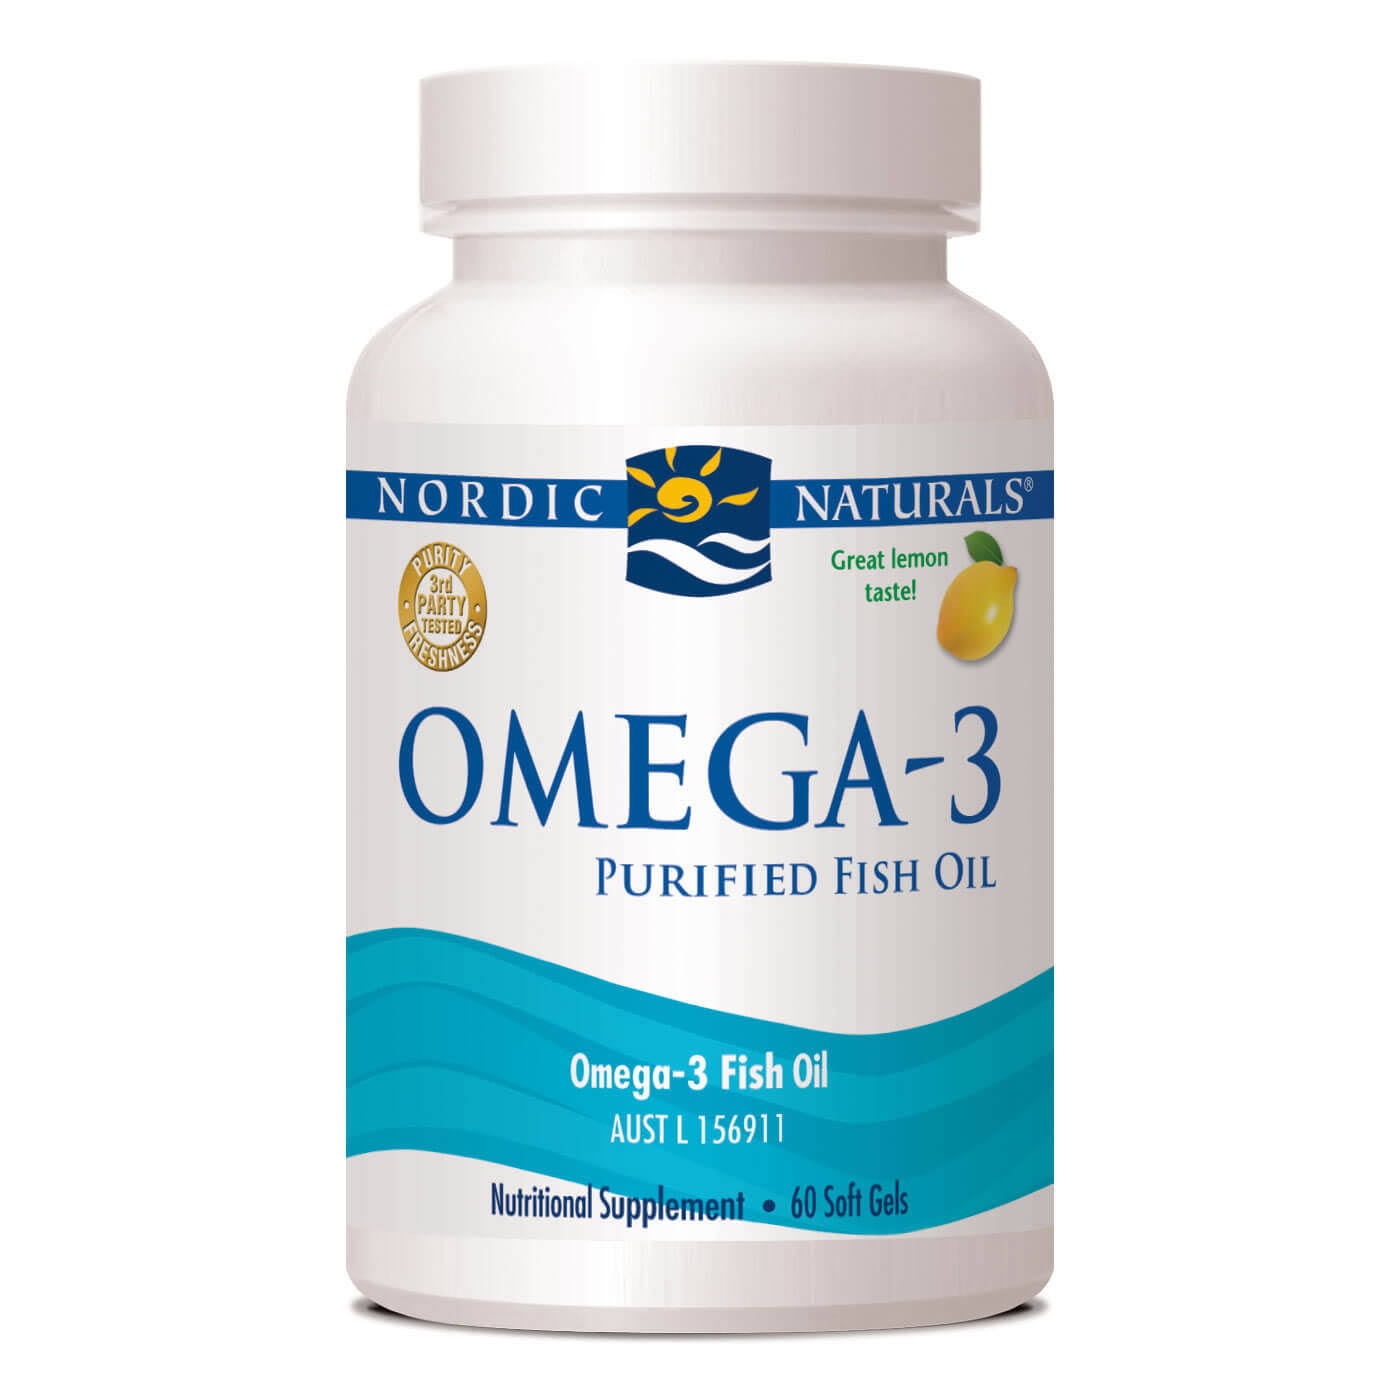 Nordic Naturals Omega-3 Purified Fish Oil